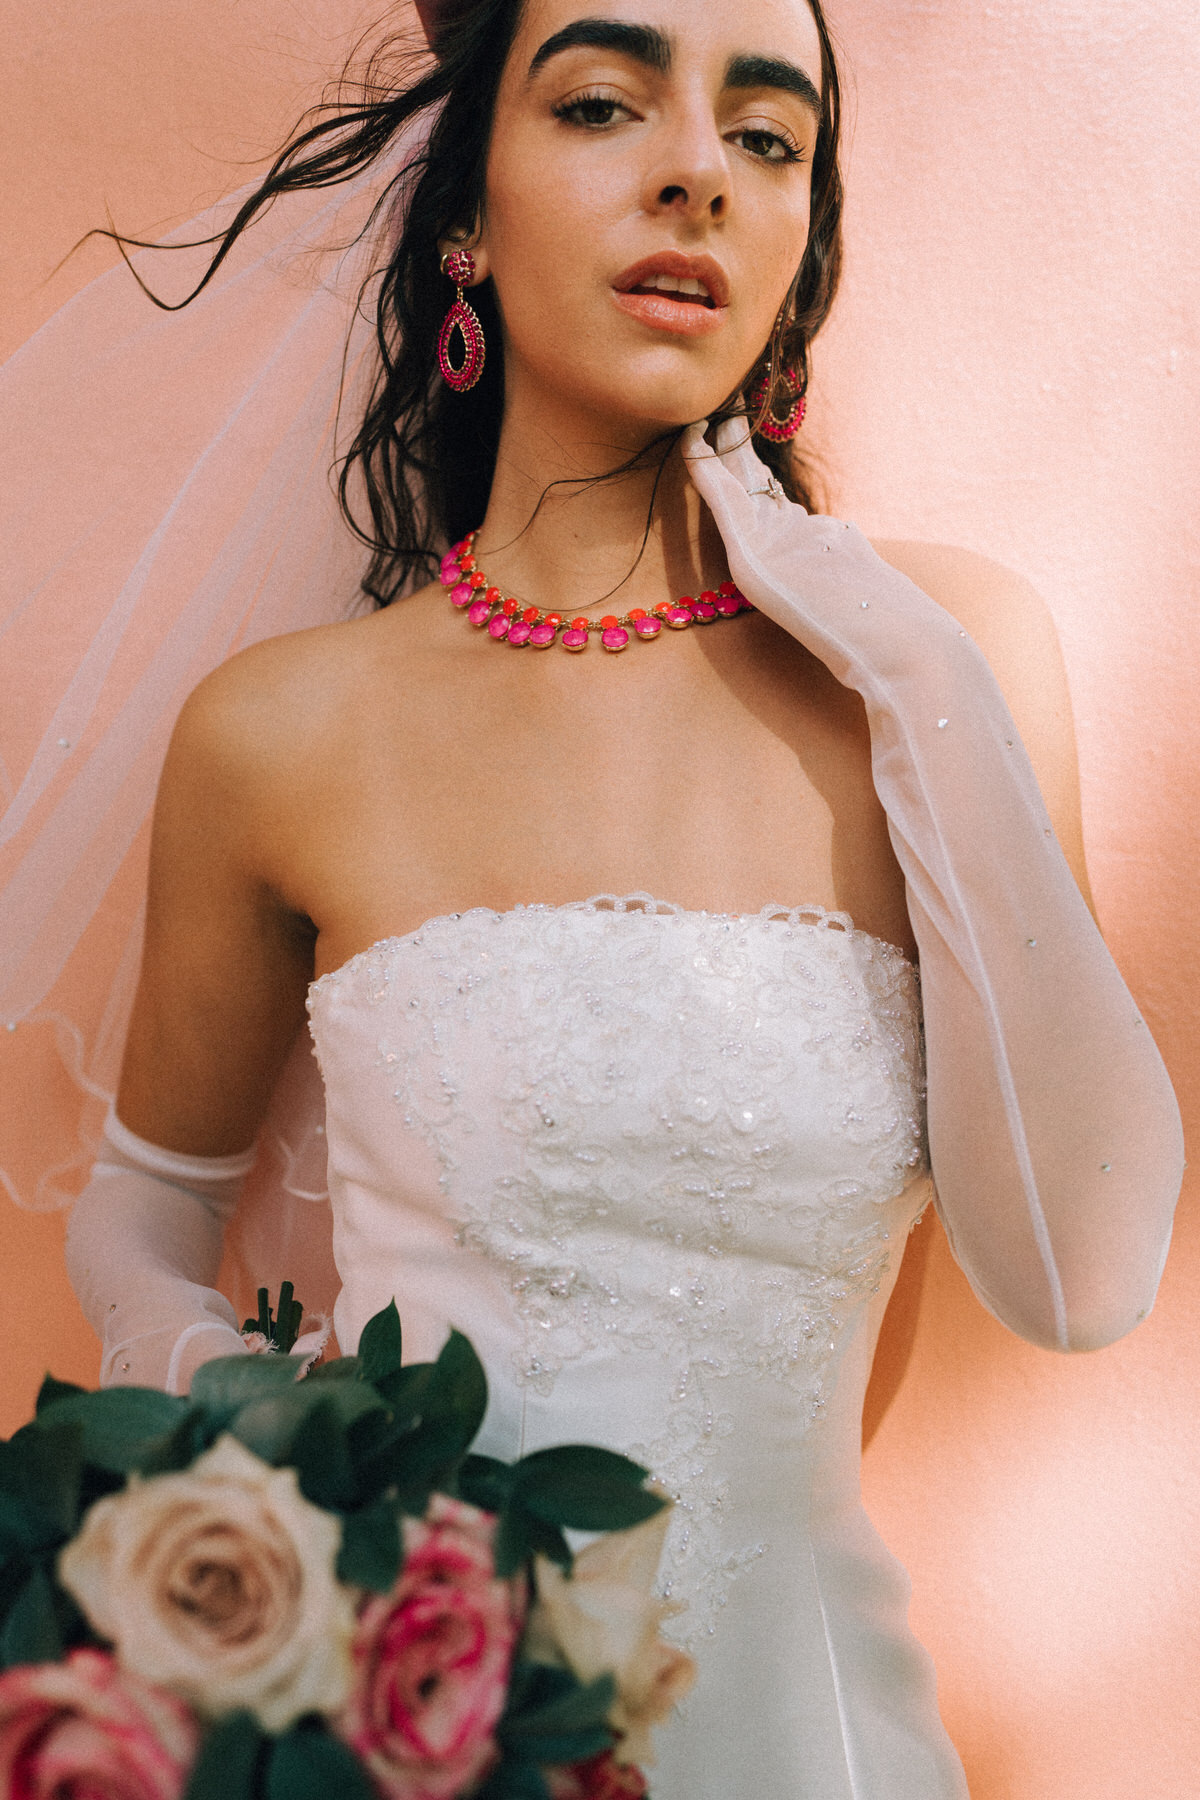 Pink bridal details including necklace, earrings, and flowers.